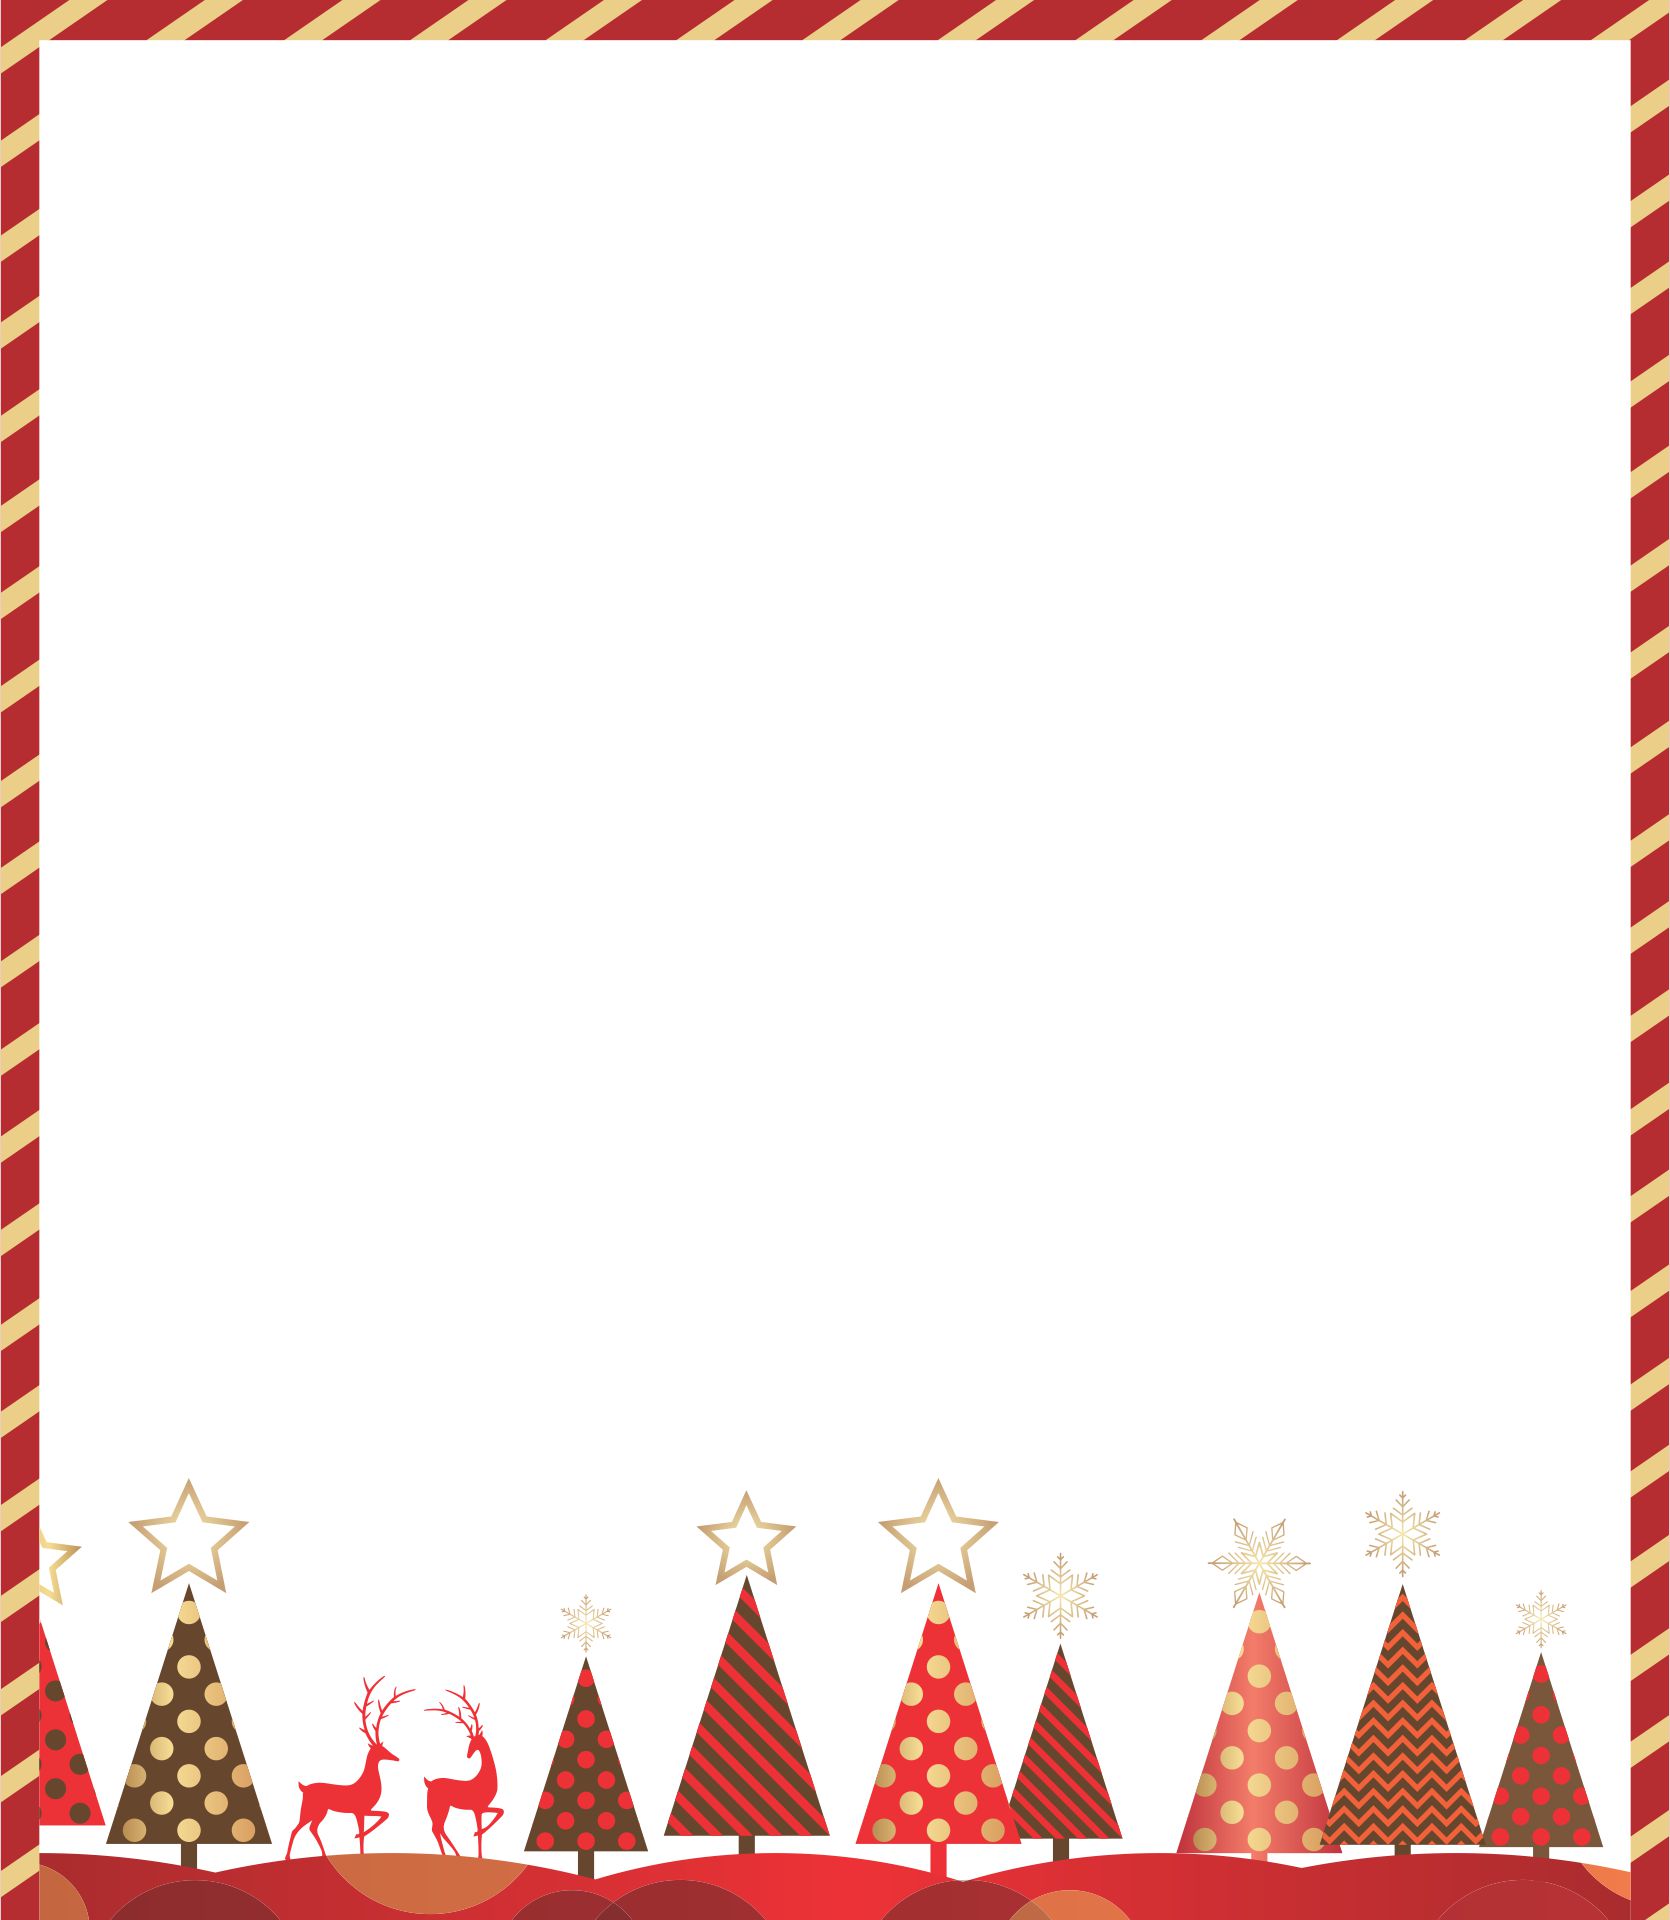 6 Best Free Printable Christmas Borders For Flyers | Images and Photos ...